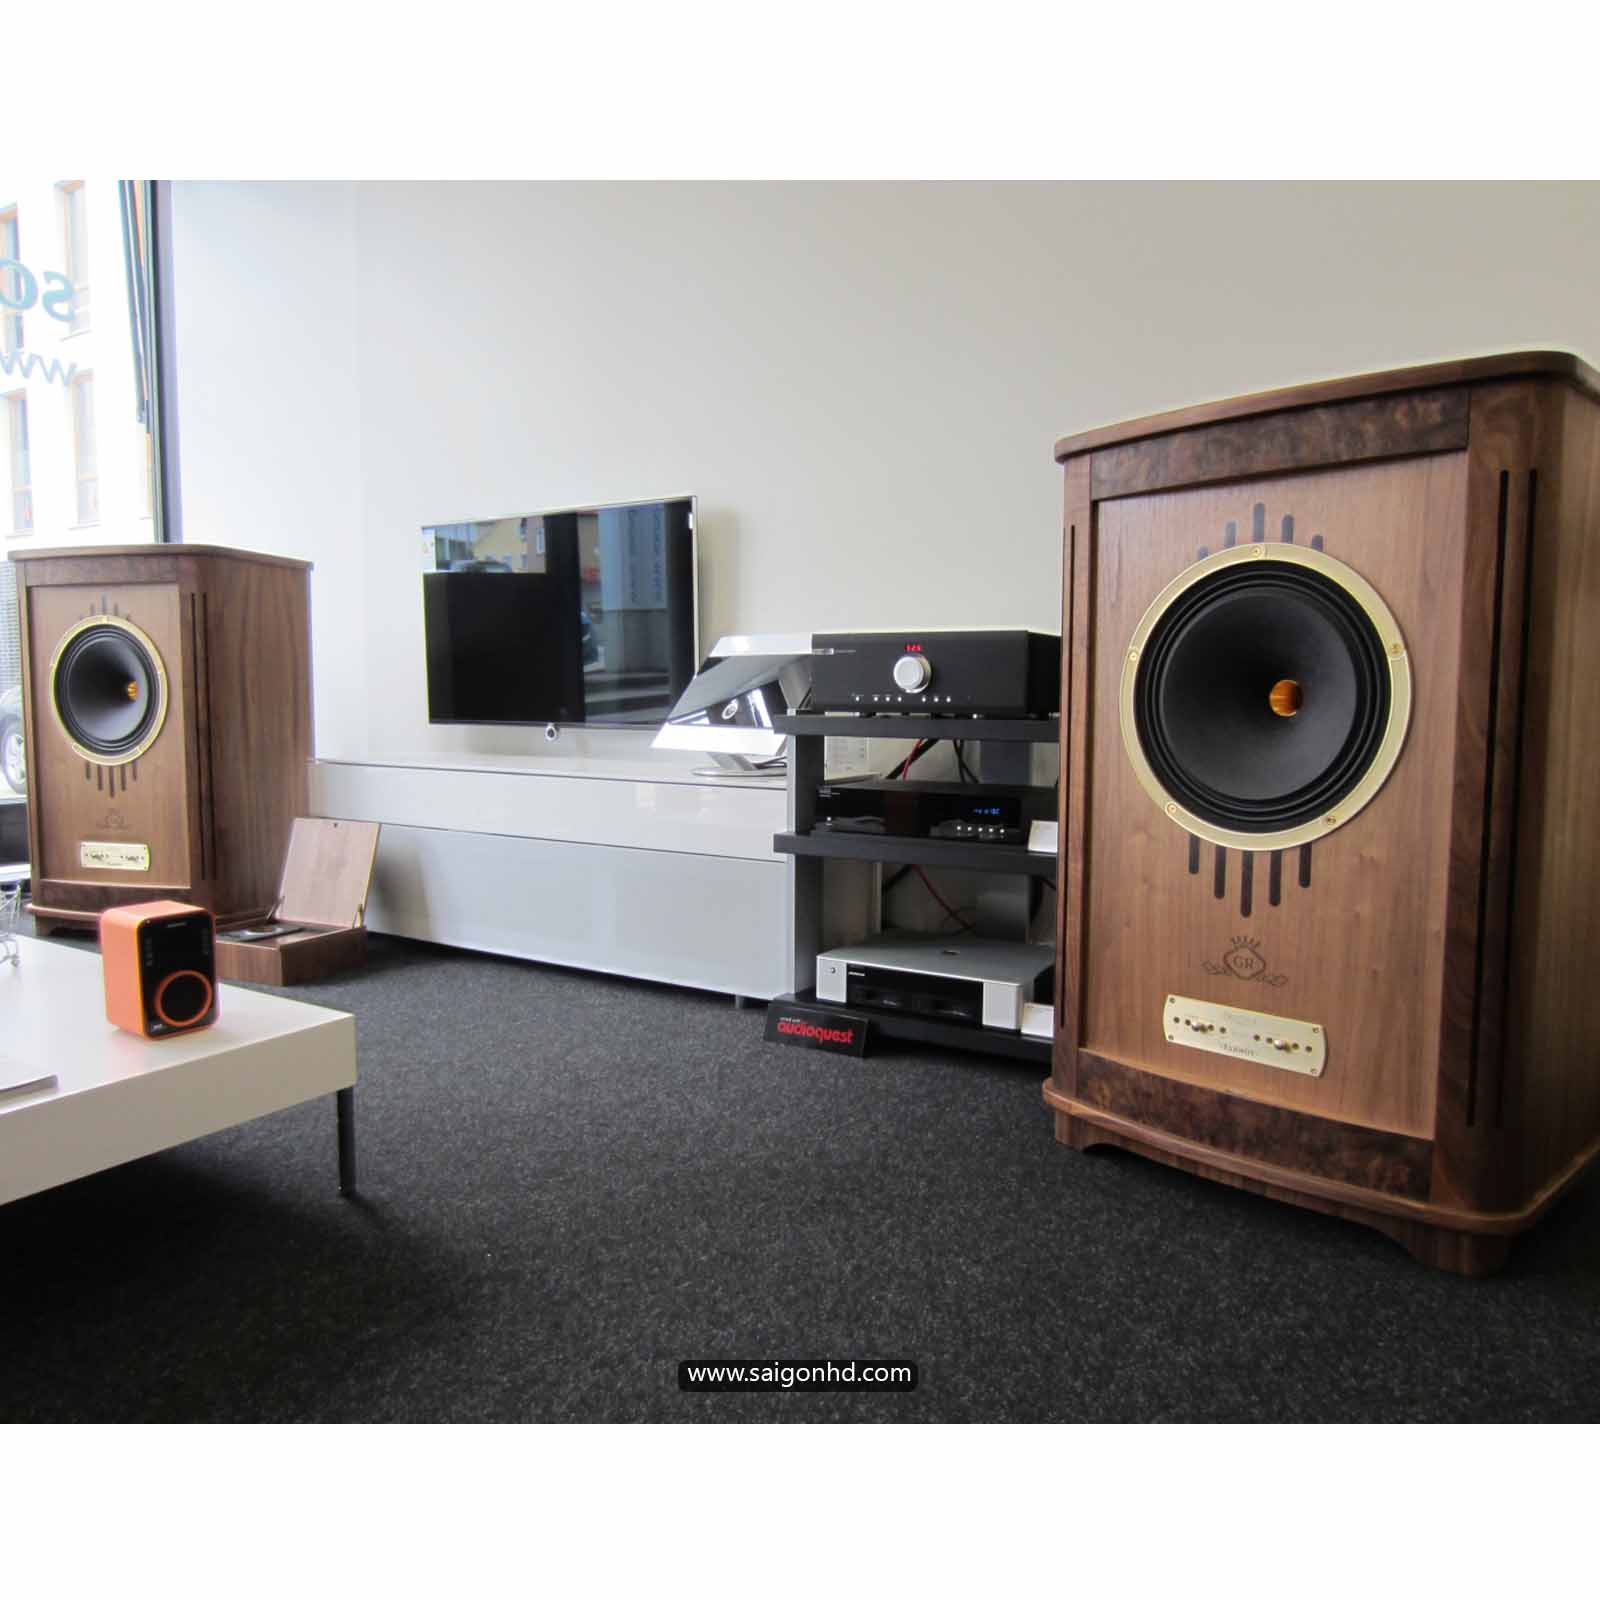 Tannoy gold. Tannoy Westminster Royal gr. Tannoy Canterbury 15 he. Tannoy Gold 8. Tannoy Westminster Royal Gold.